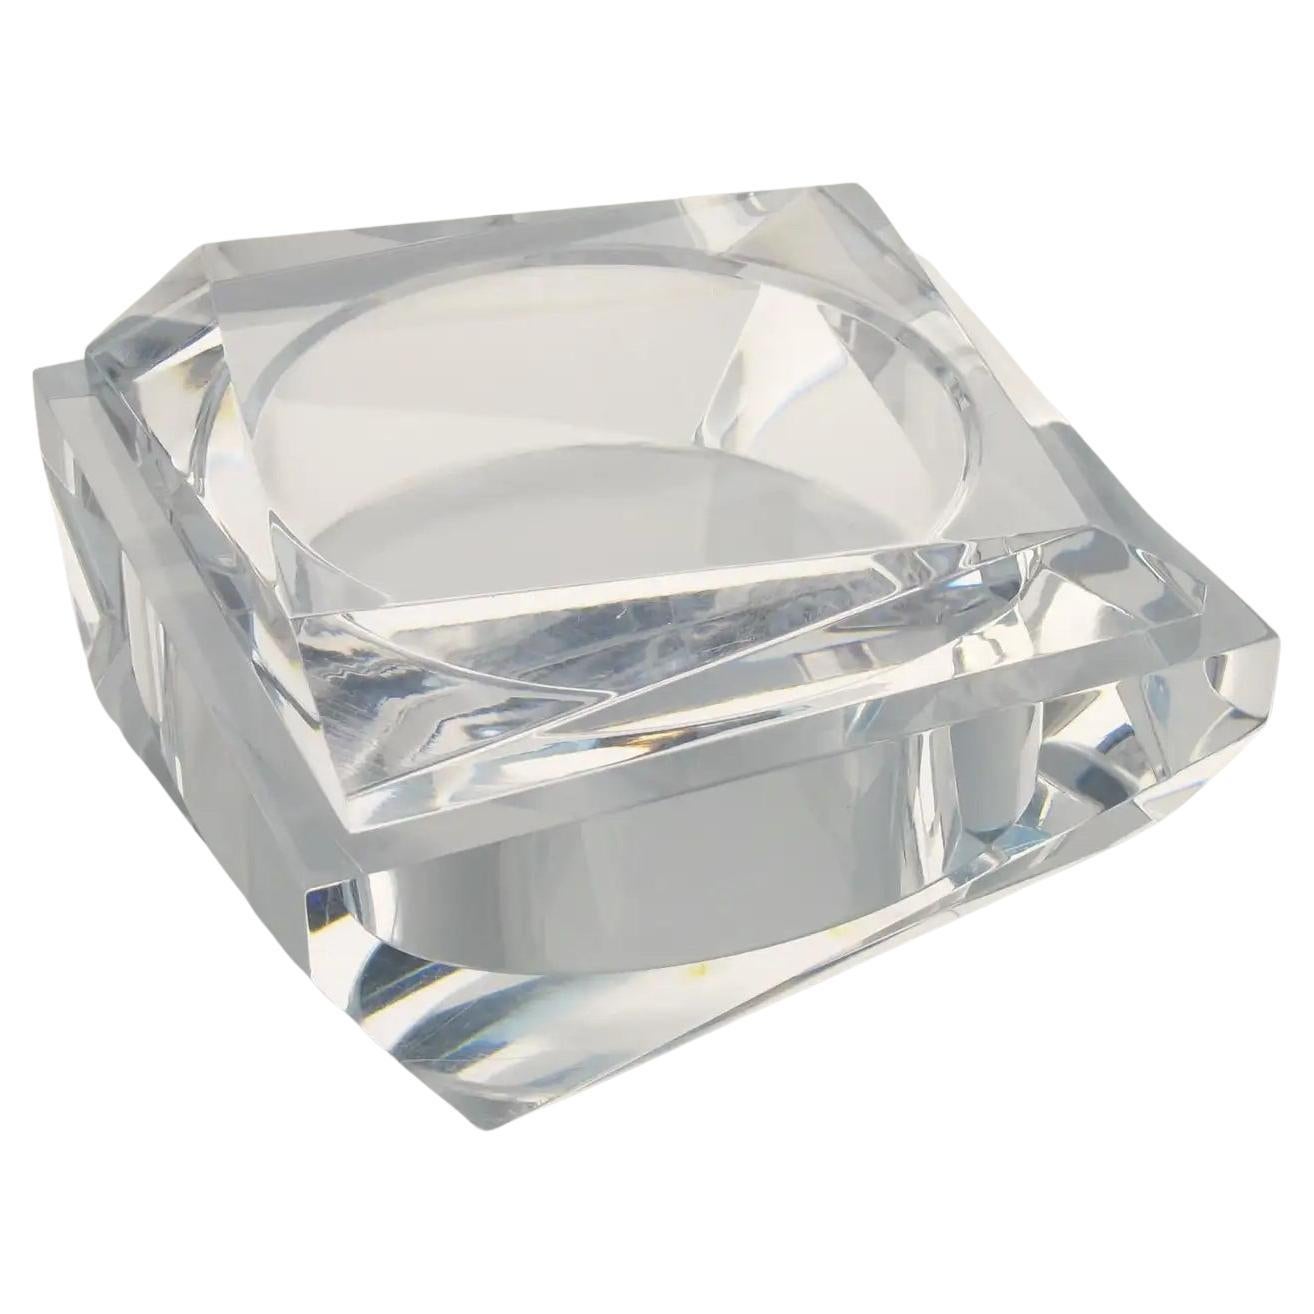 Prismatic Geometric Lucite Box, Italy 1960s For Sale